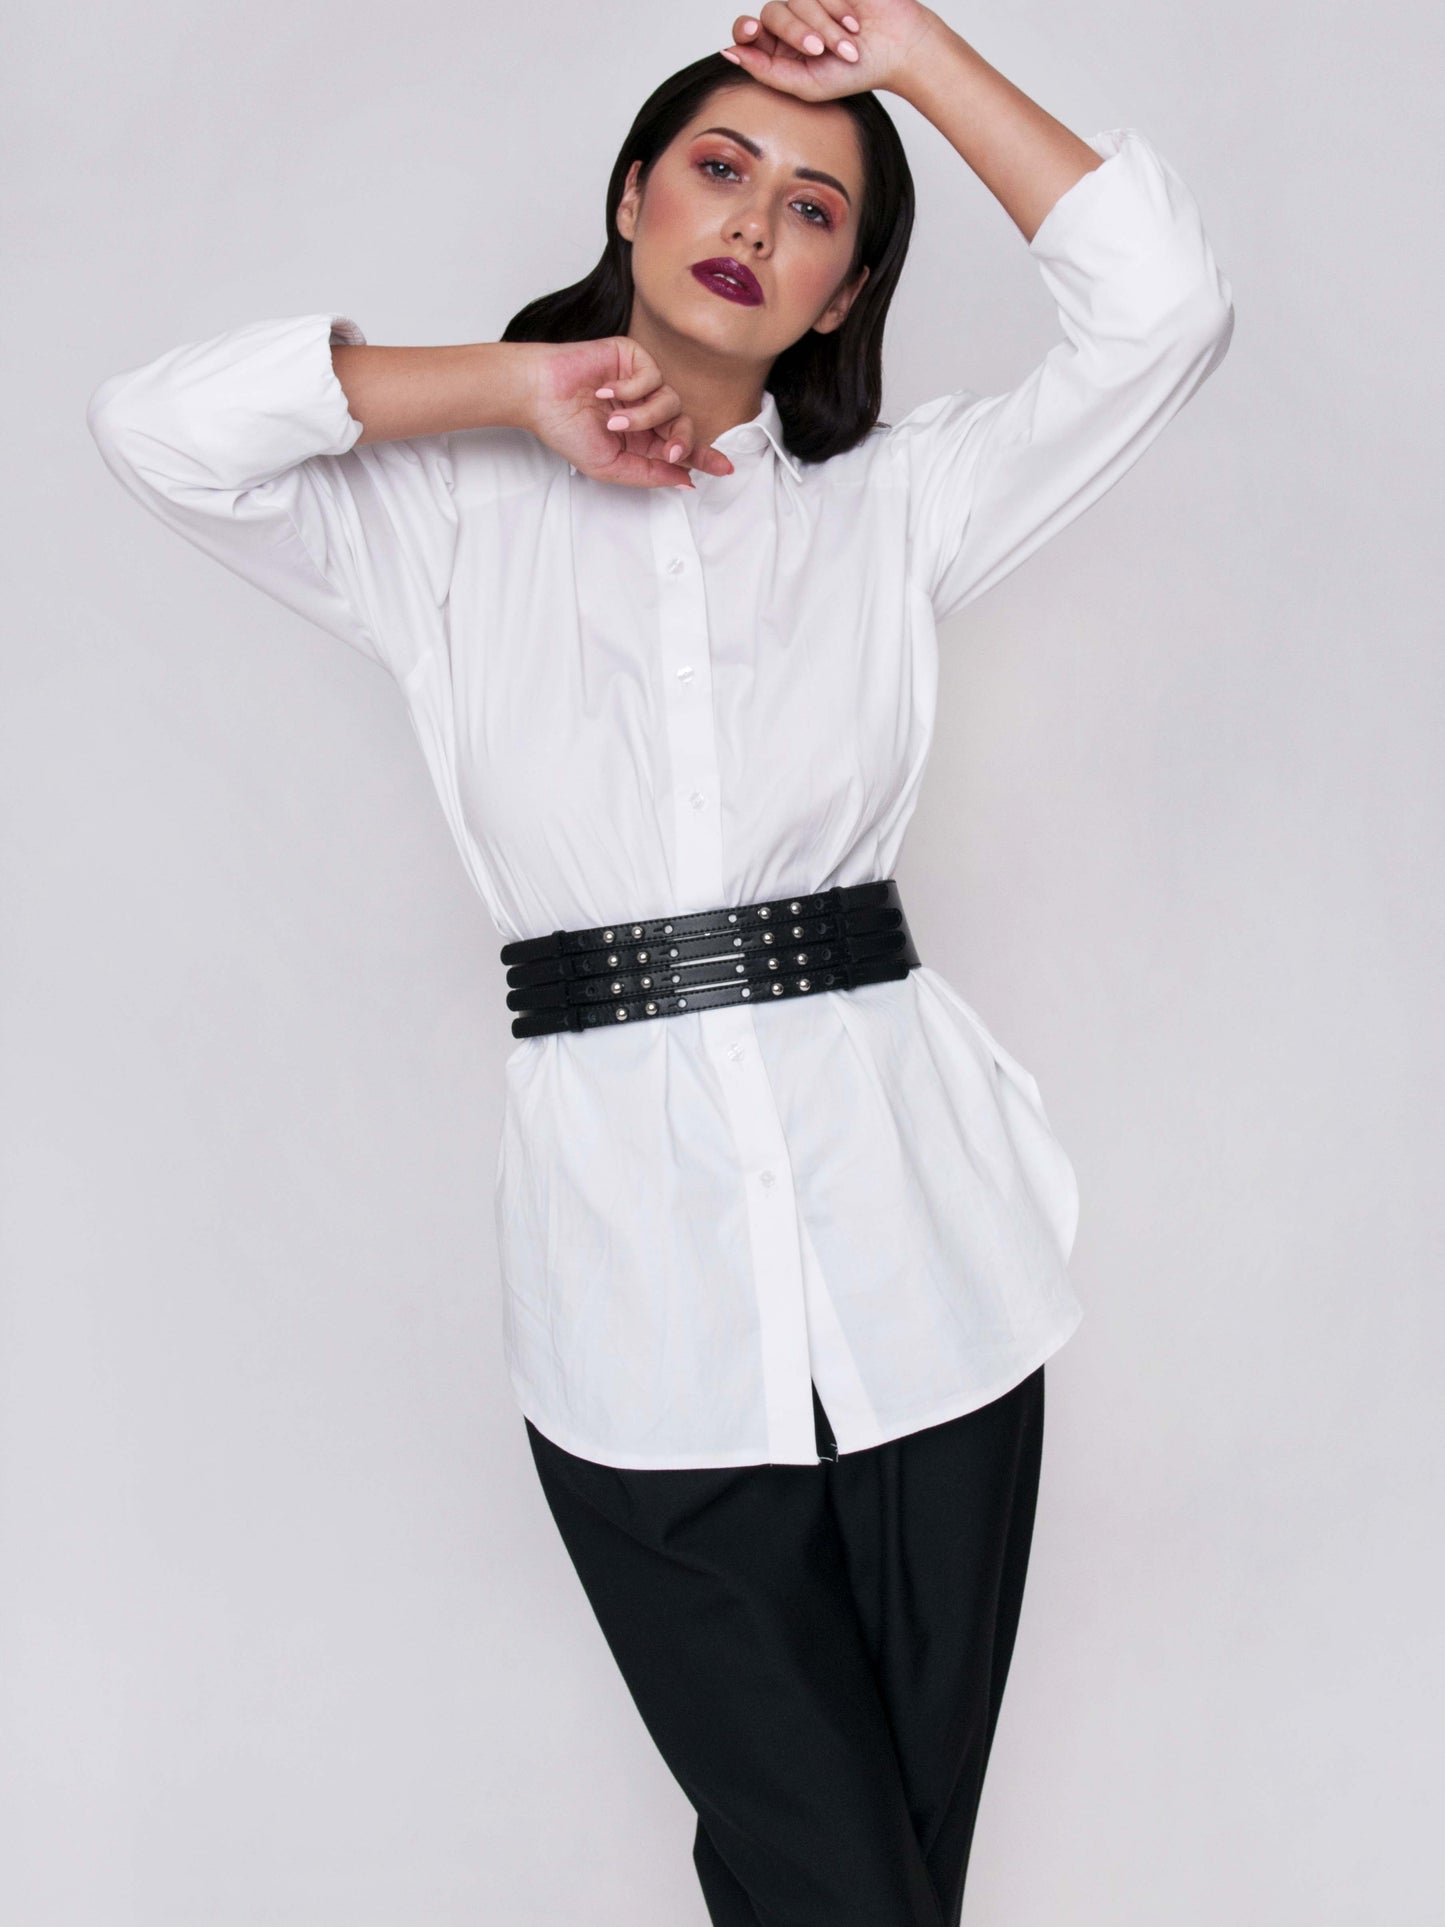 Front view of black leather high waist belt worn by a woman over white shirt.